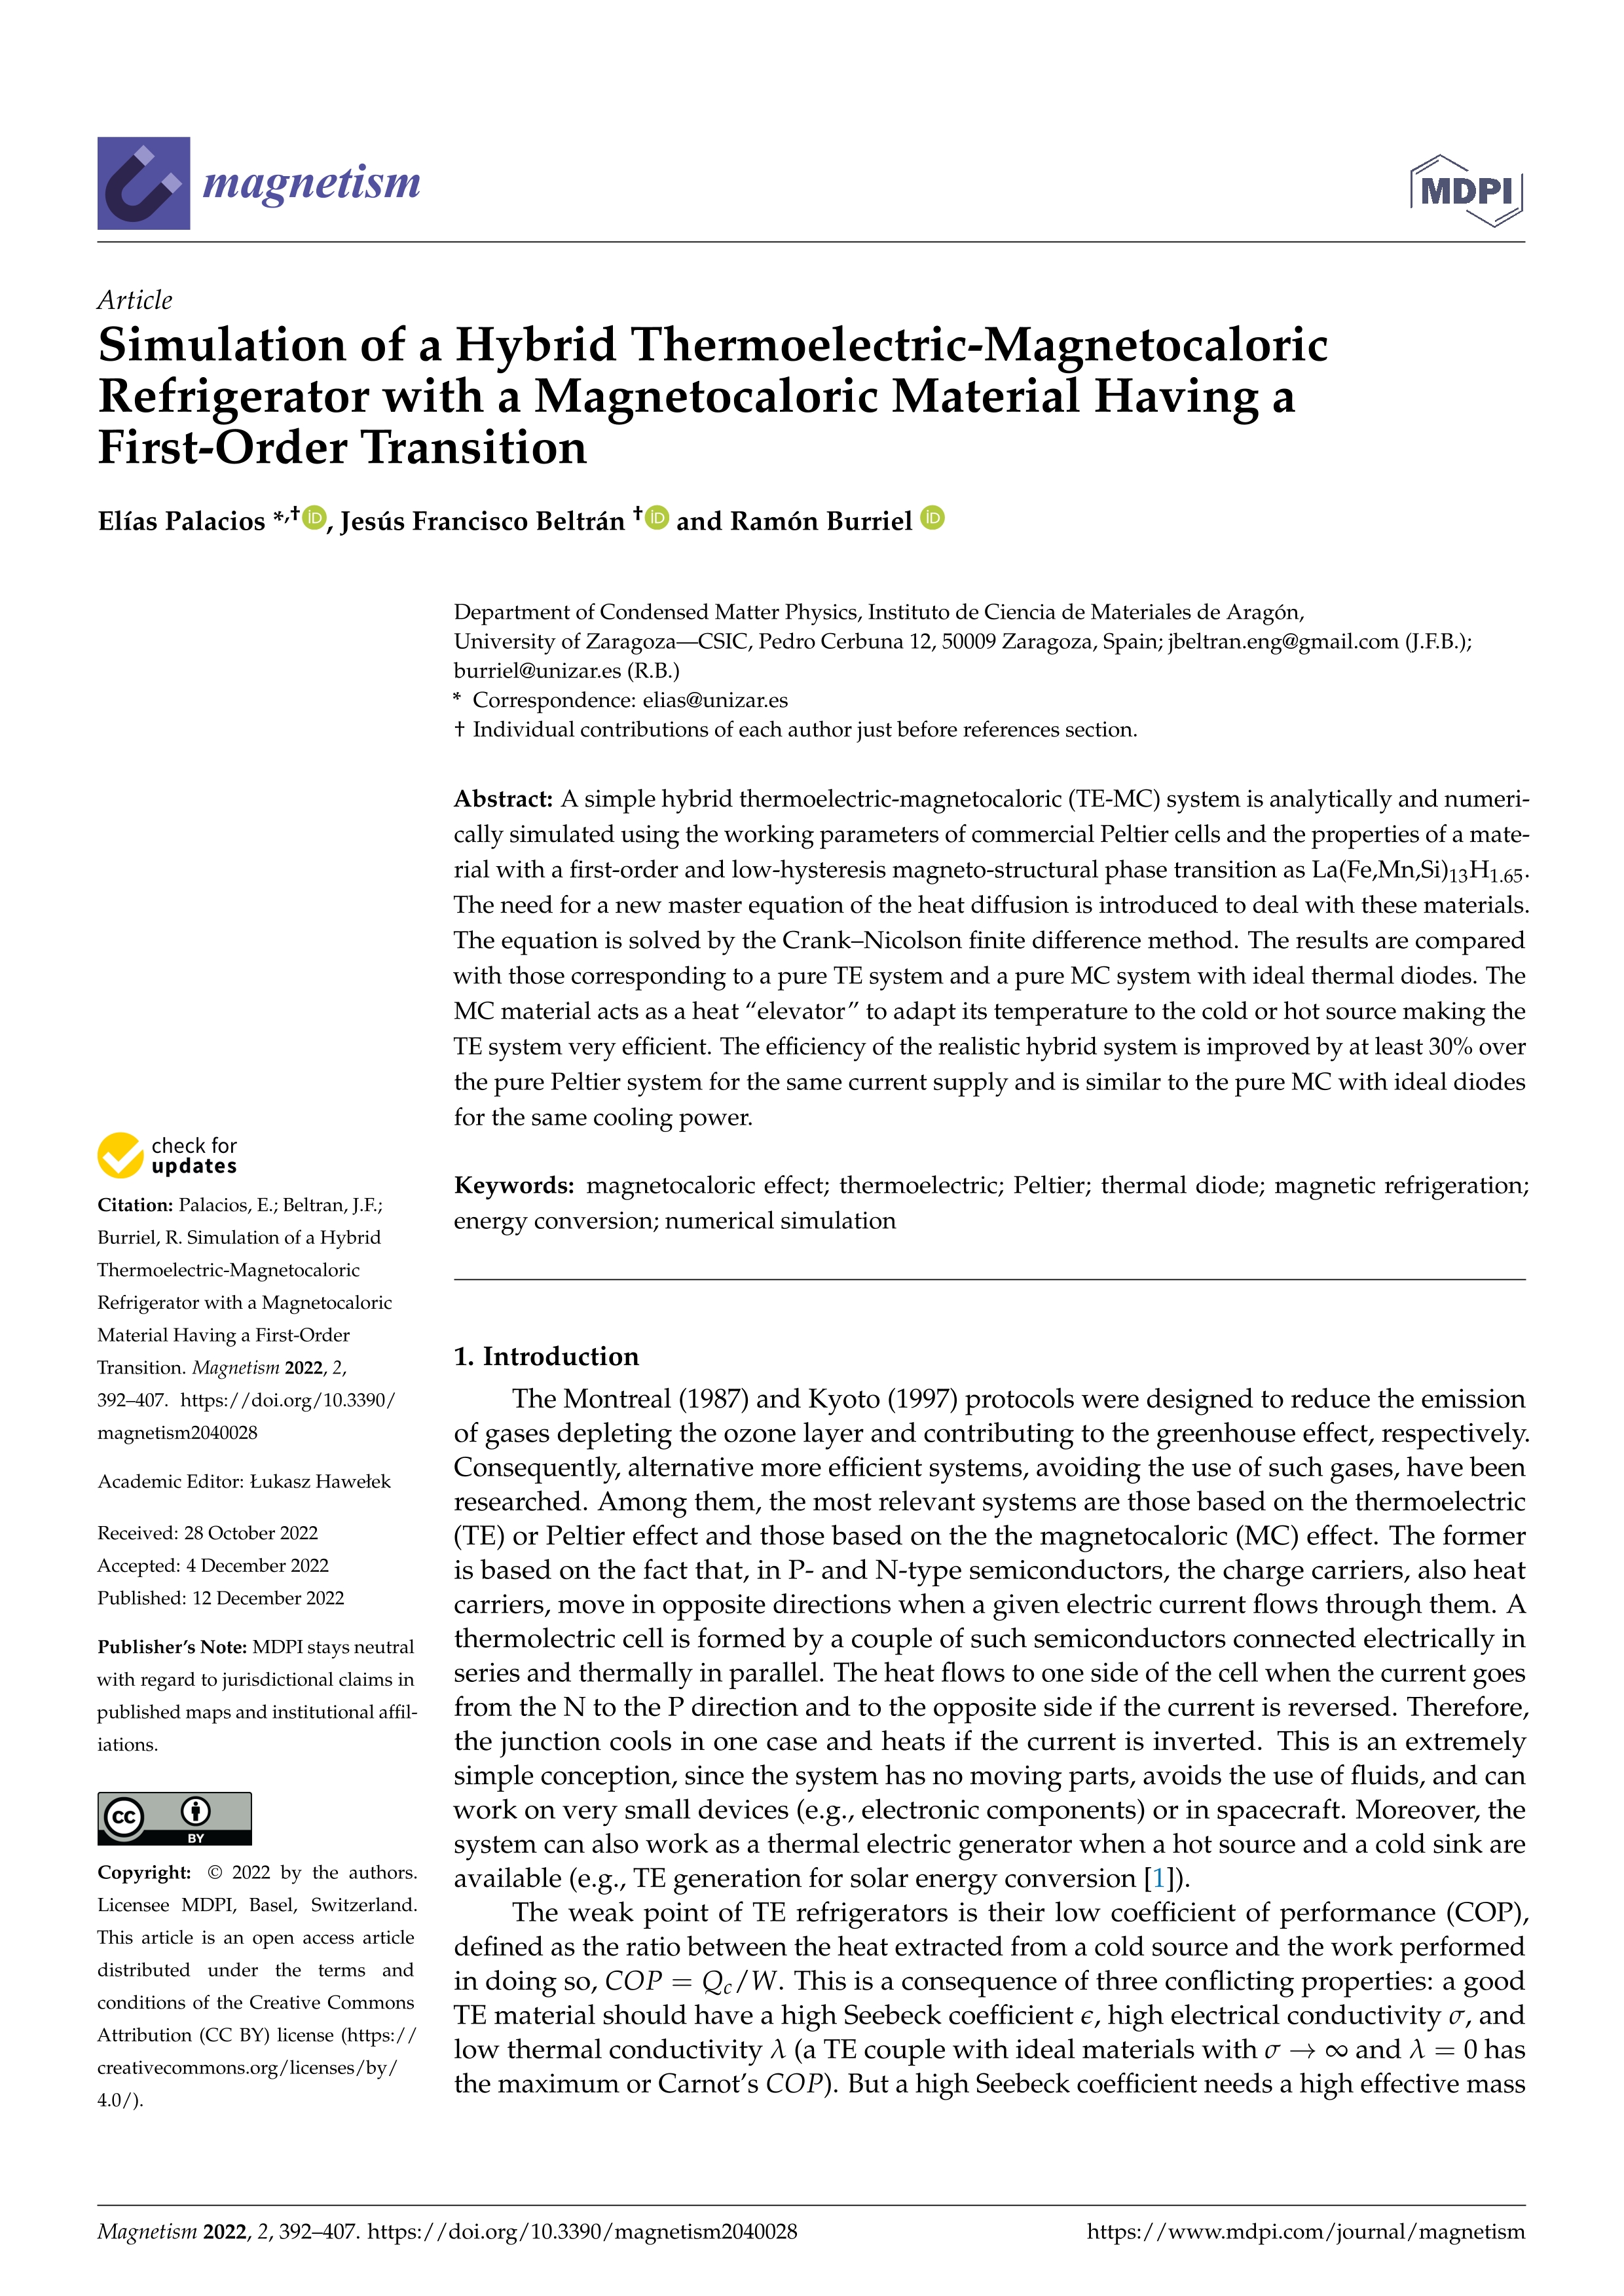 Simulation of a Hybrid Thermoelectric-Magnetocaloric Refrigerator with a Magnetocaloric Material Having a First-Order Transition